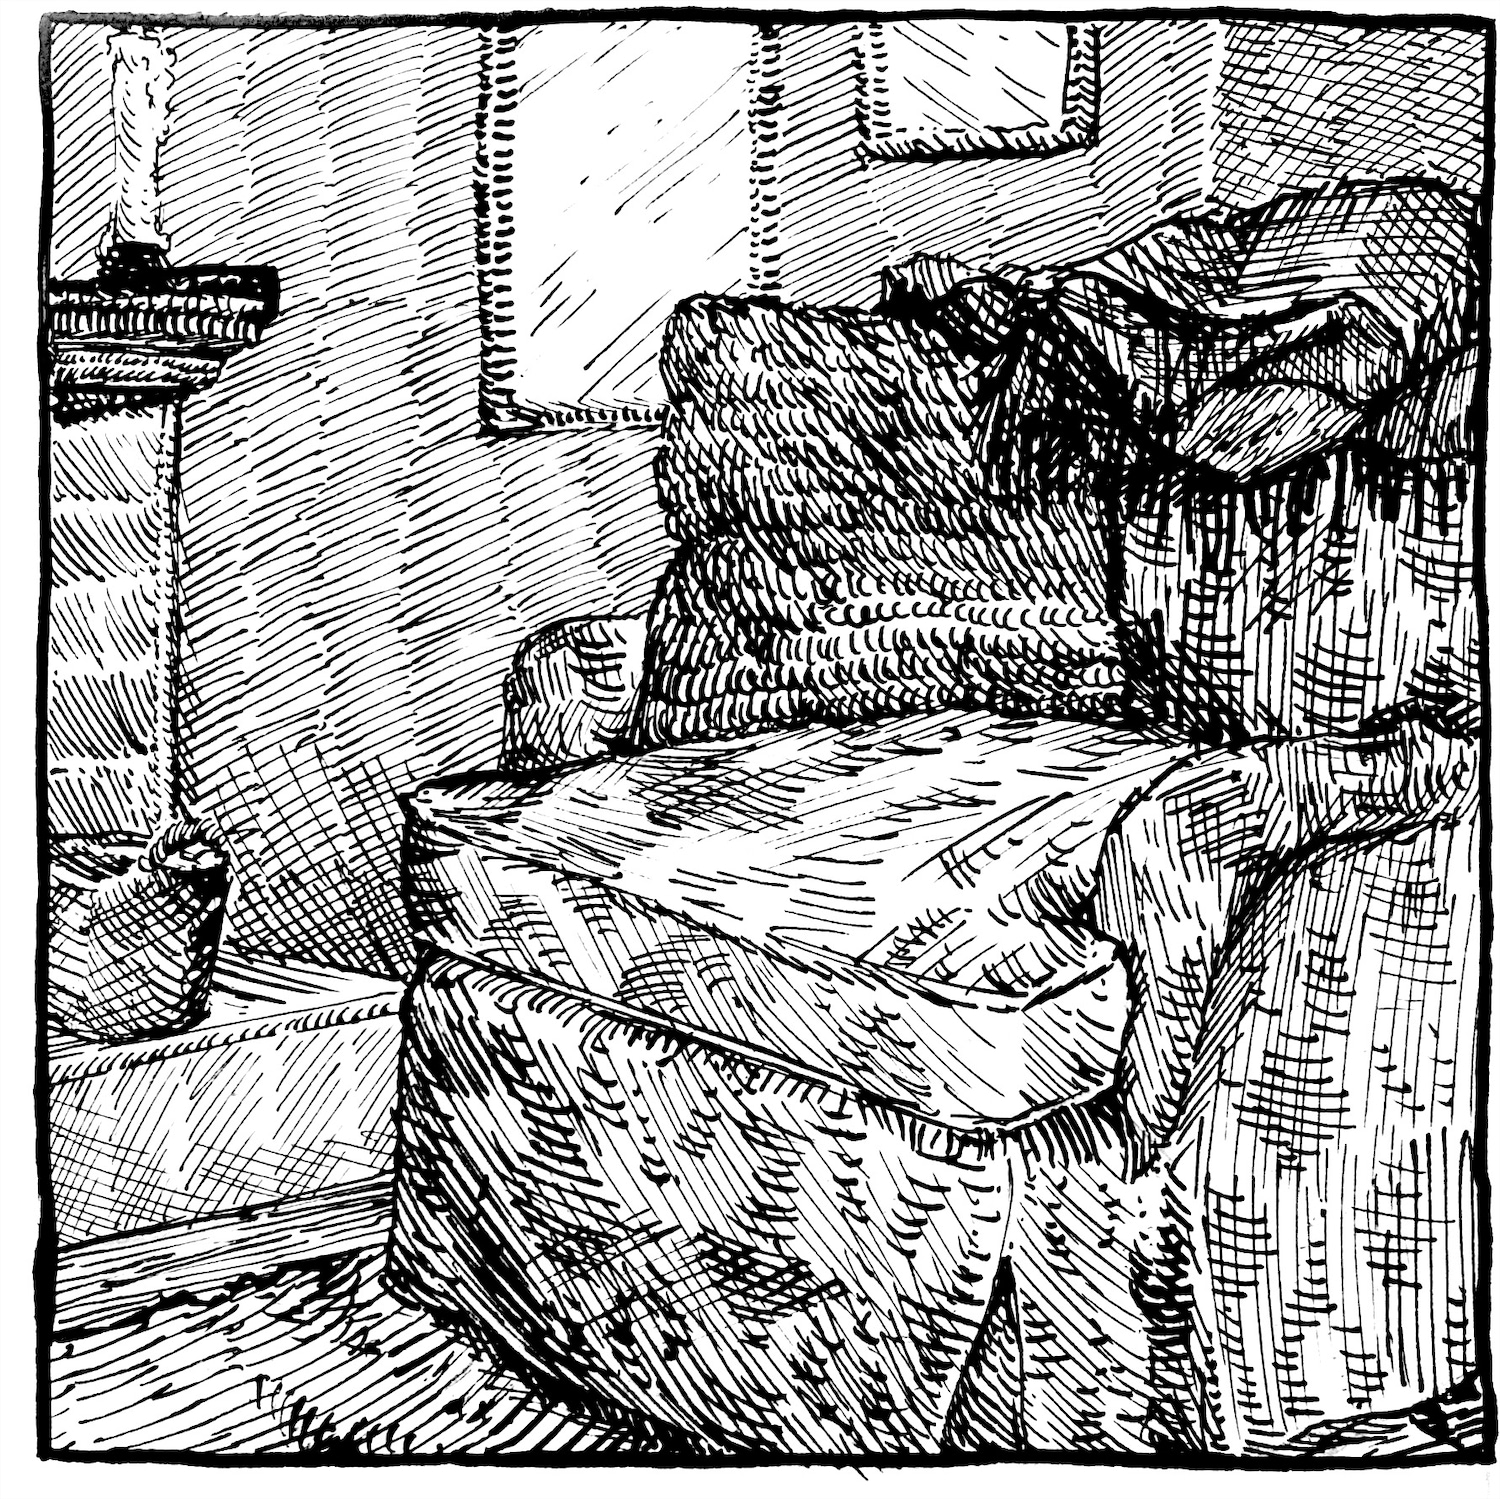 A square pen-and-ink crosshatched illustration of a patterned loveseat with a pillow and a blanket draped over it in a cozy room.